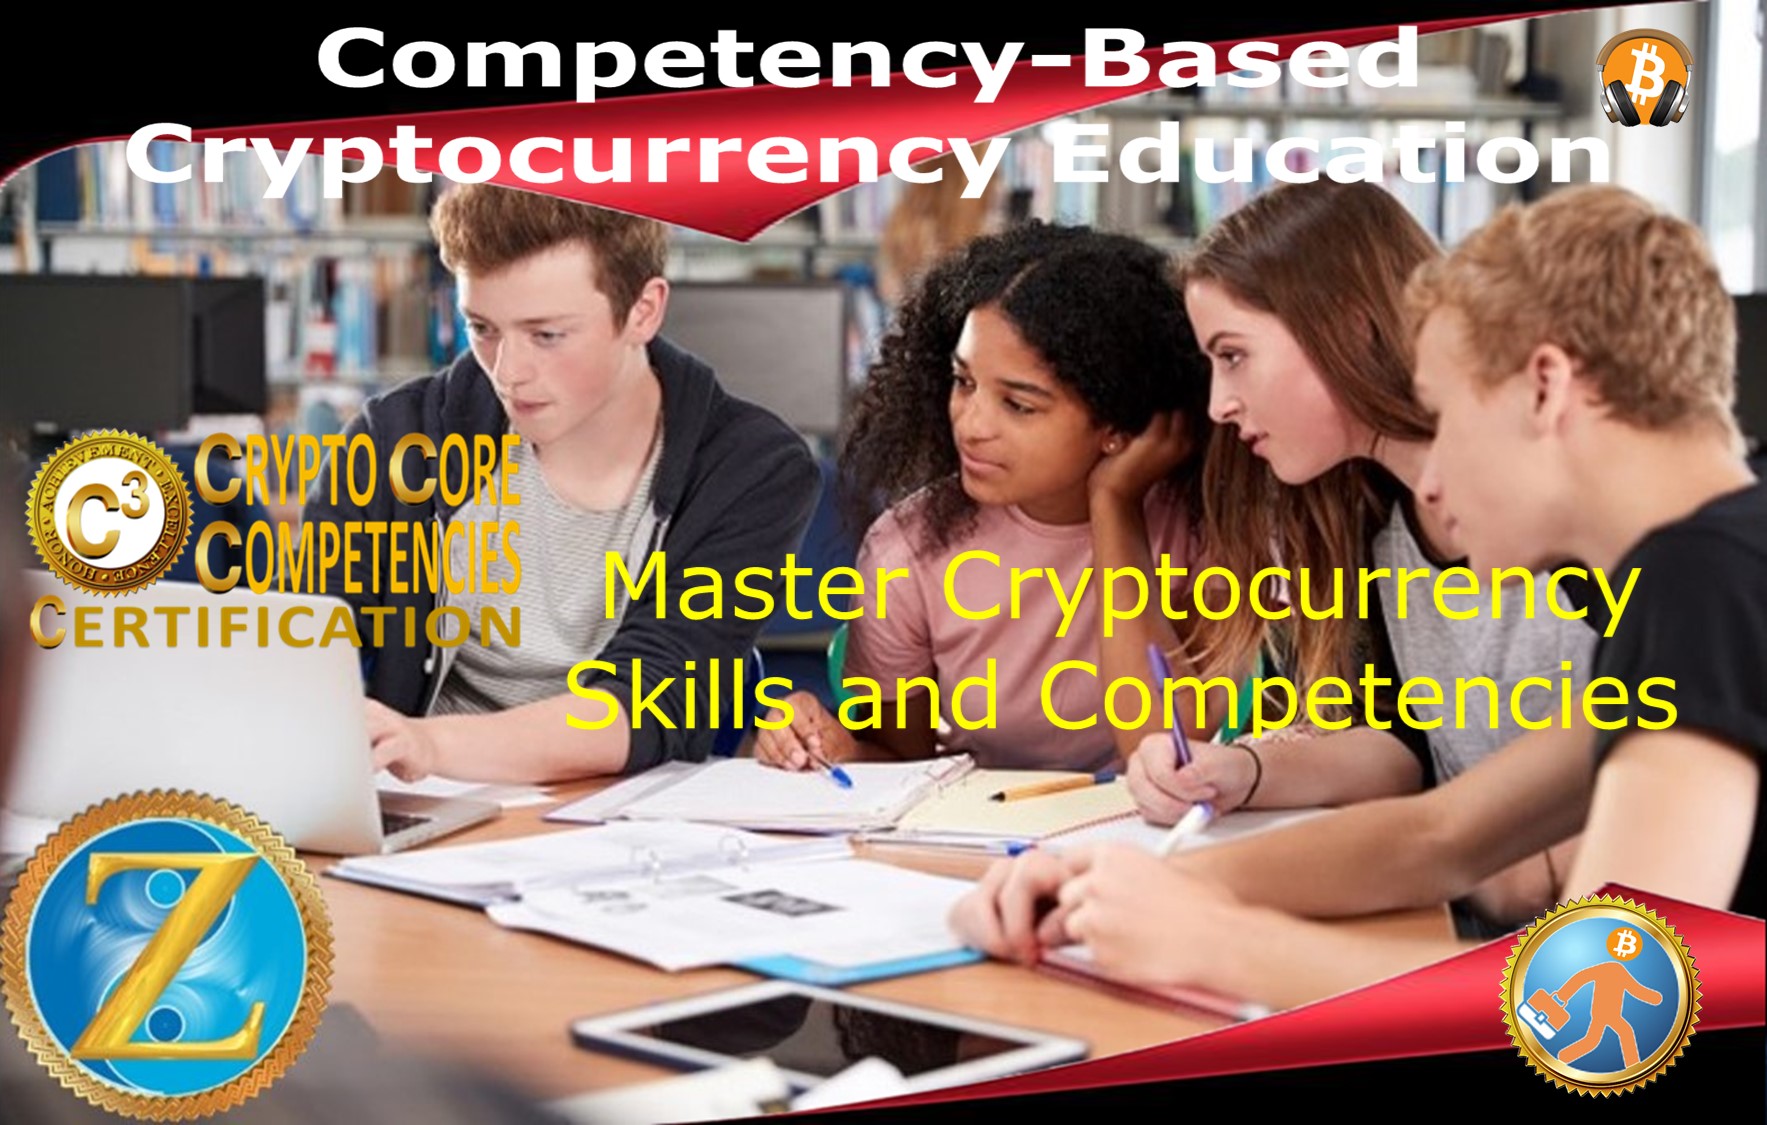 Certify C3 Competency Based Cryptocurrency Education